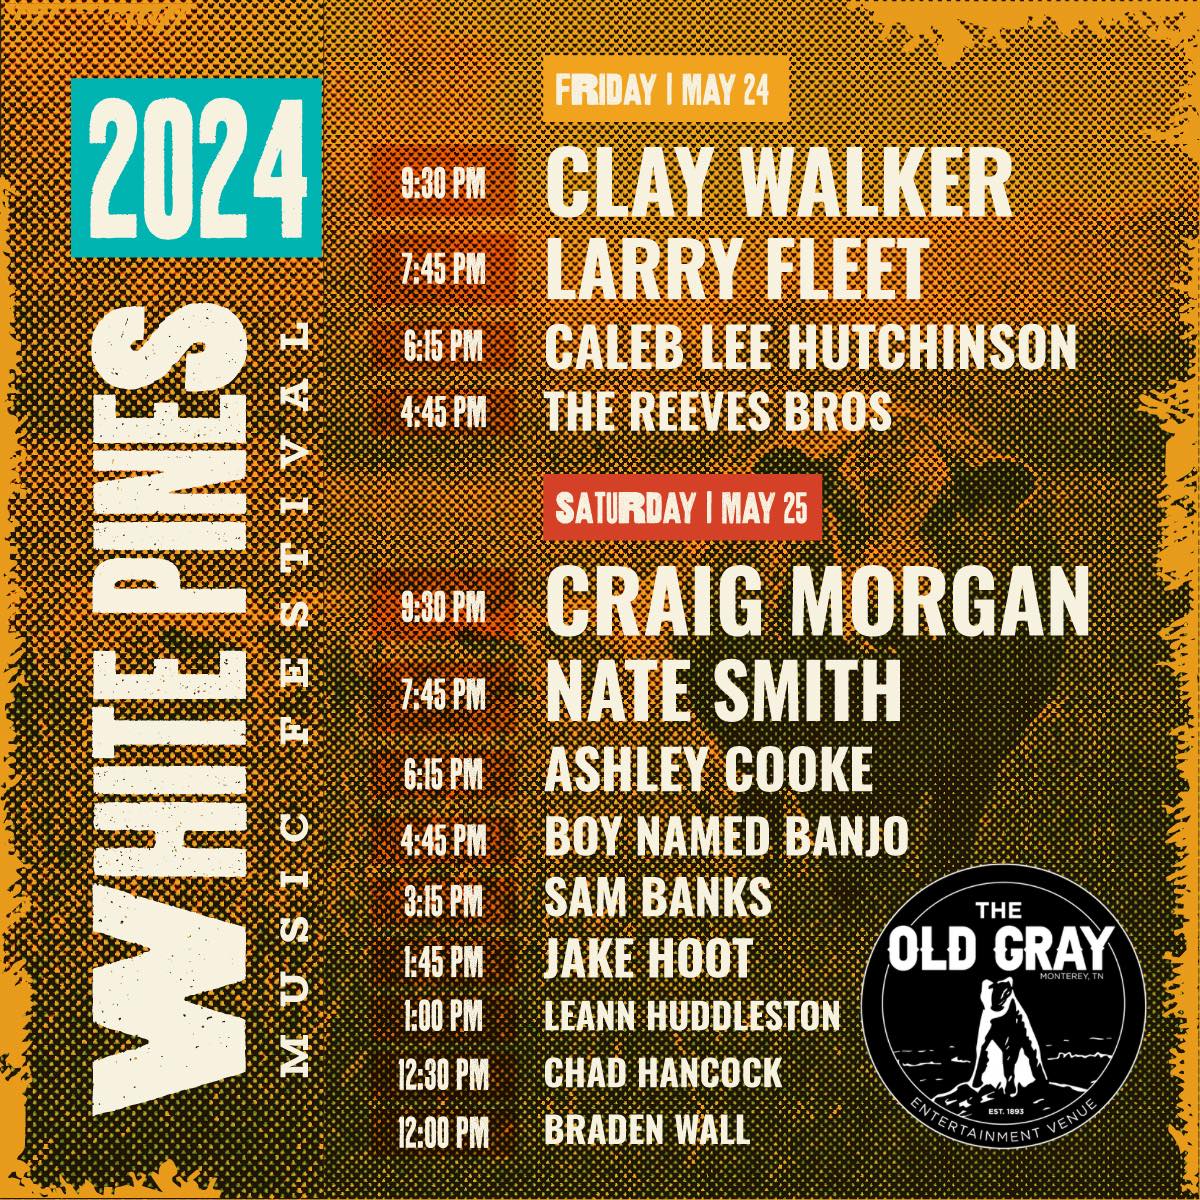 White Pines Music Festival 2024 lineup poster